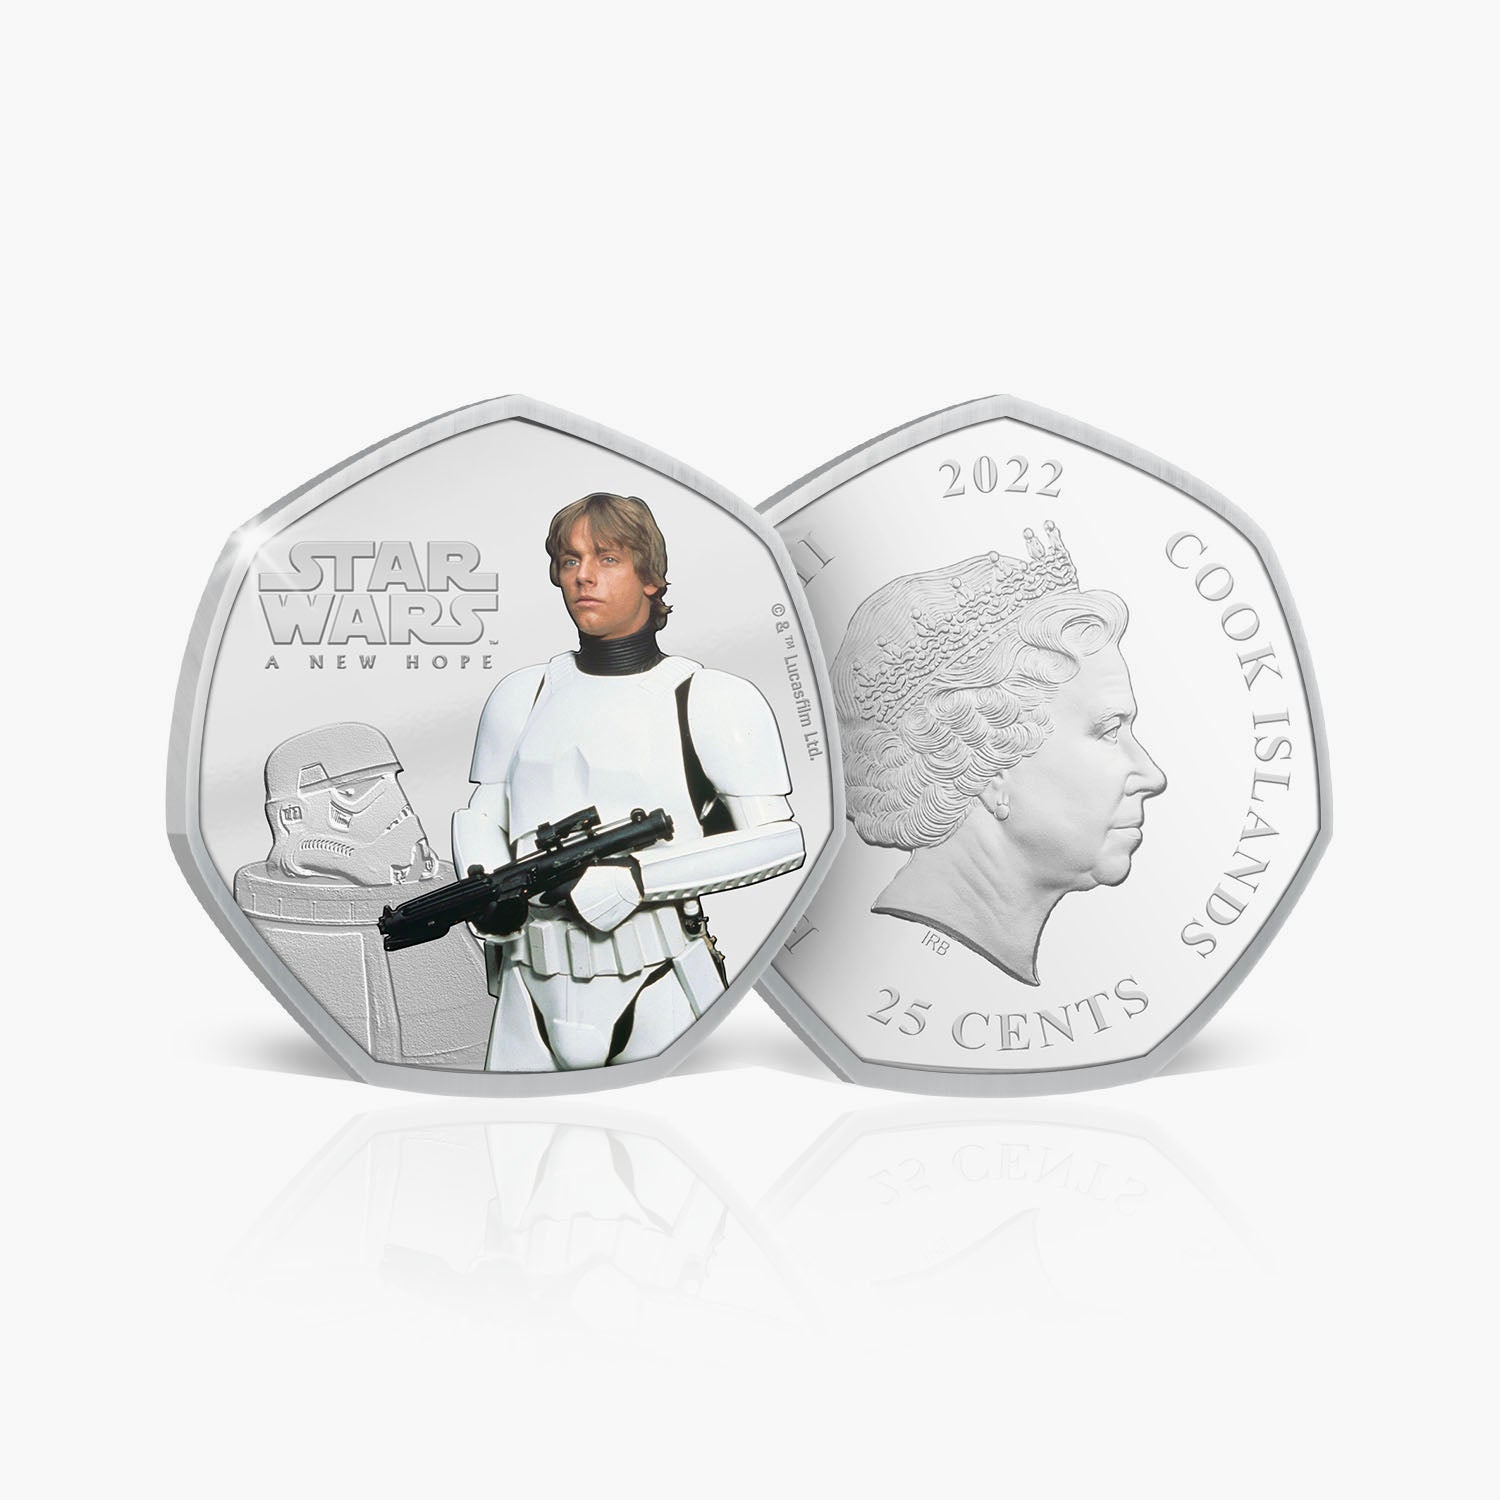 A New Hope - Undercover Silver Plated Coin